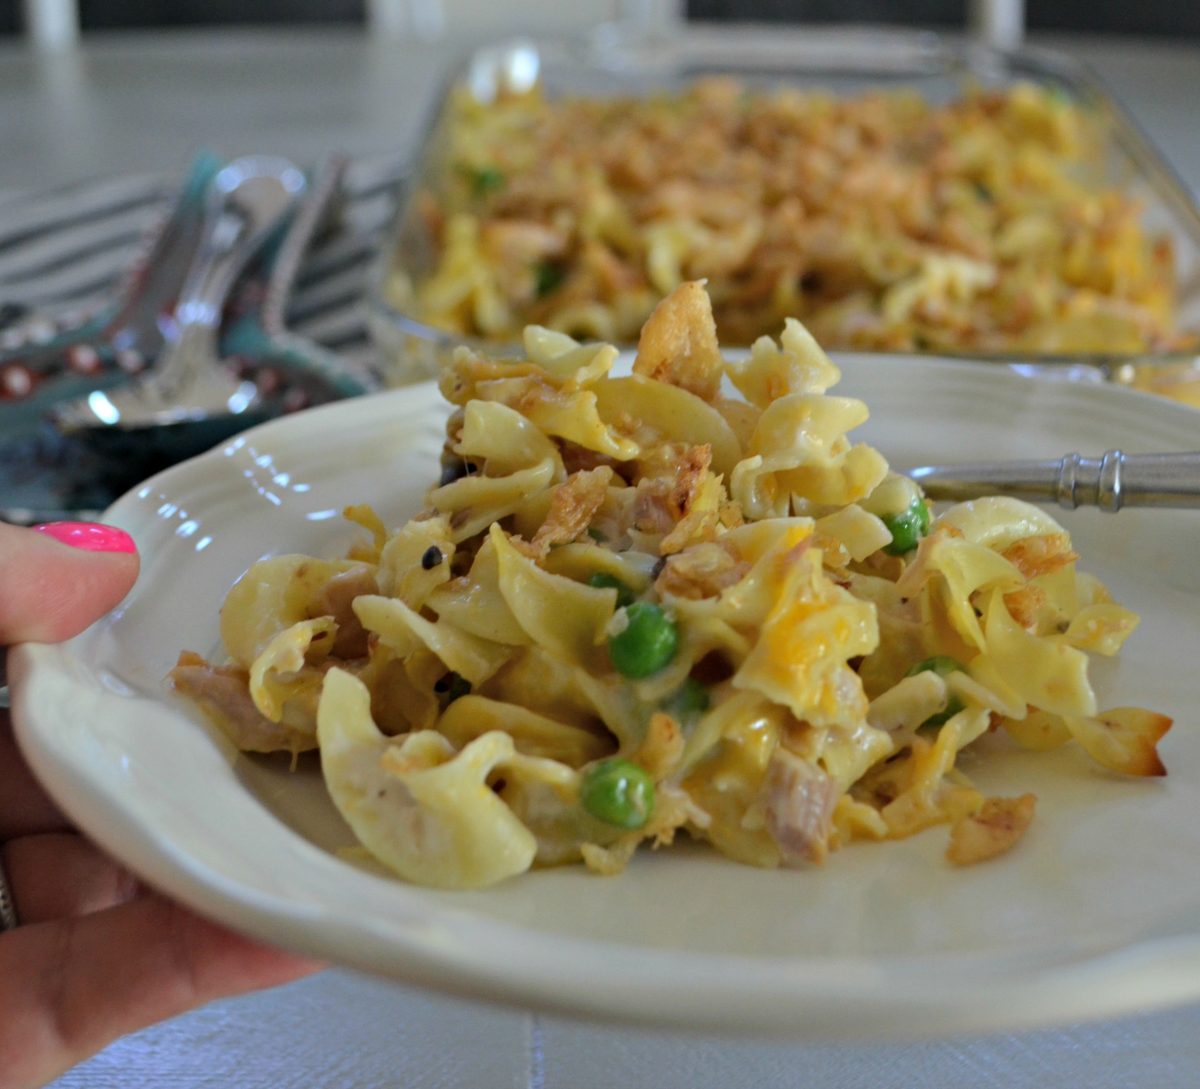 tuna noodle casserole is one of our favorite childhood recipes – The cooked casserole on a plate